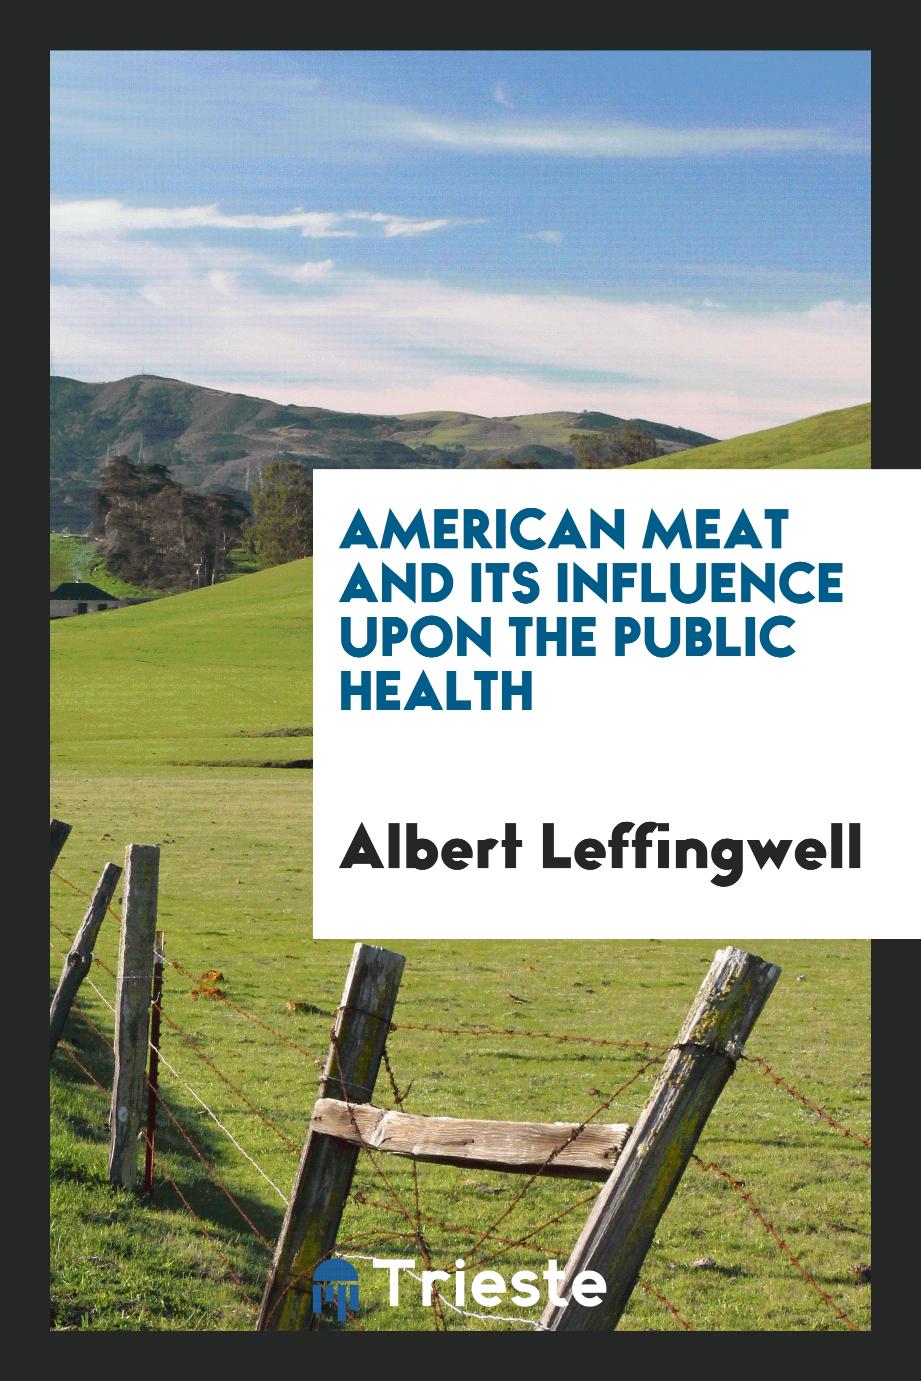 American meat and its influence upon the public health